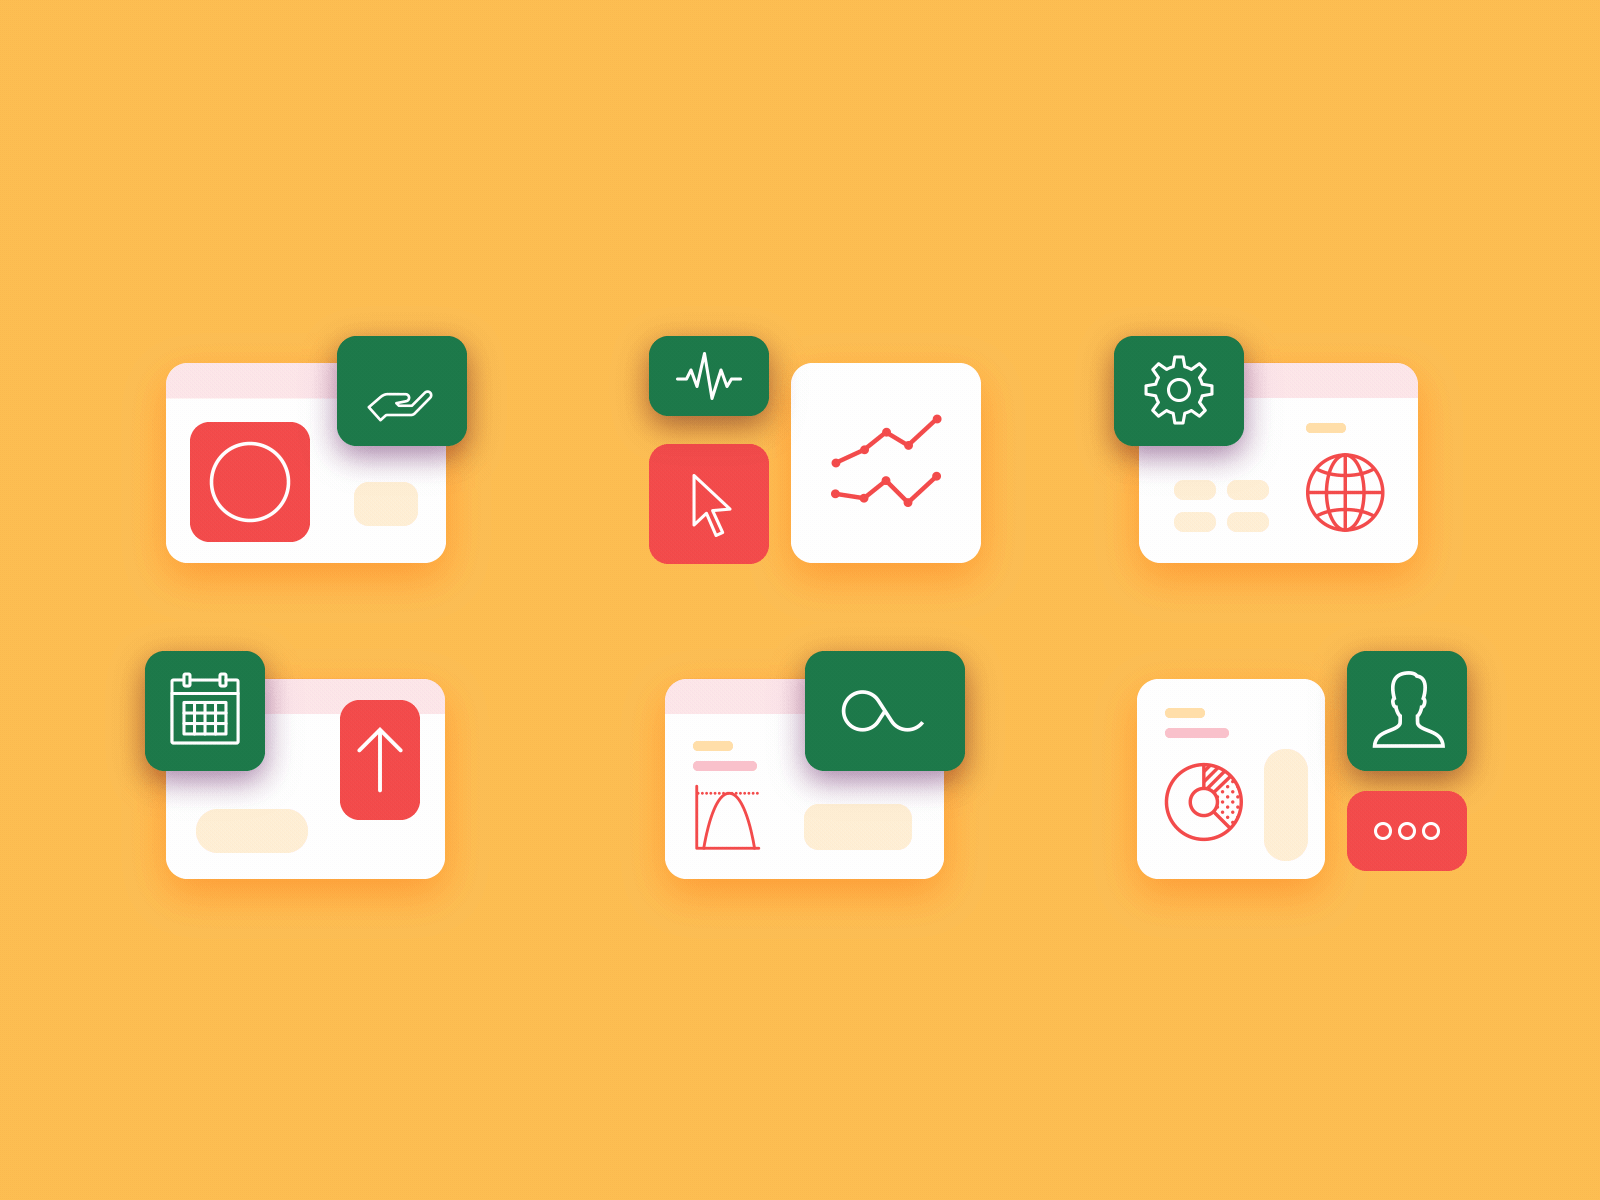 UI Animated Icons by Margarita Ivanchikova for Icons8 on Dribbble